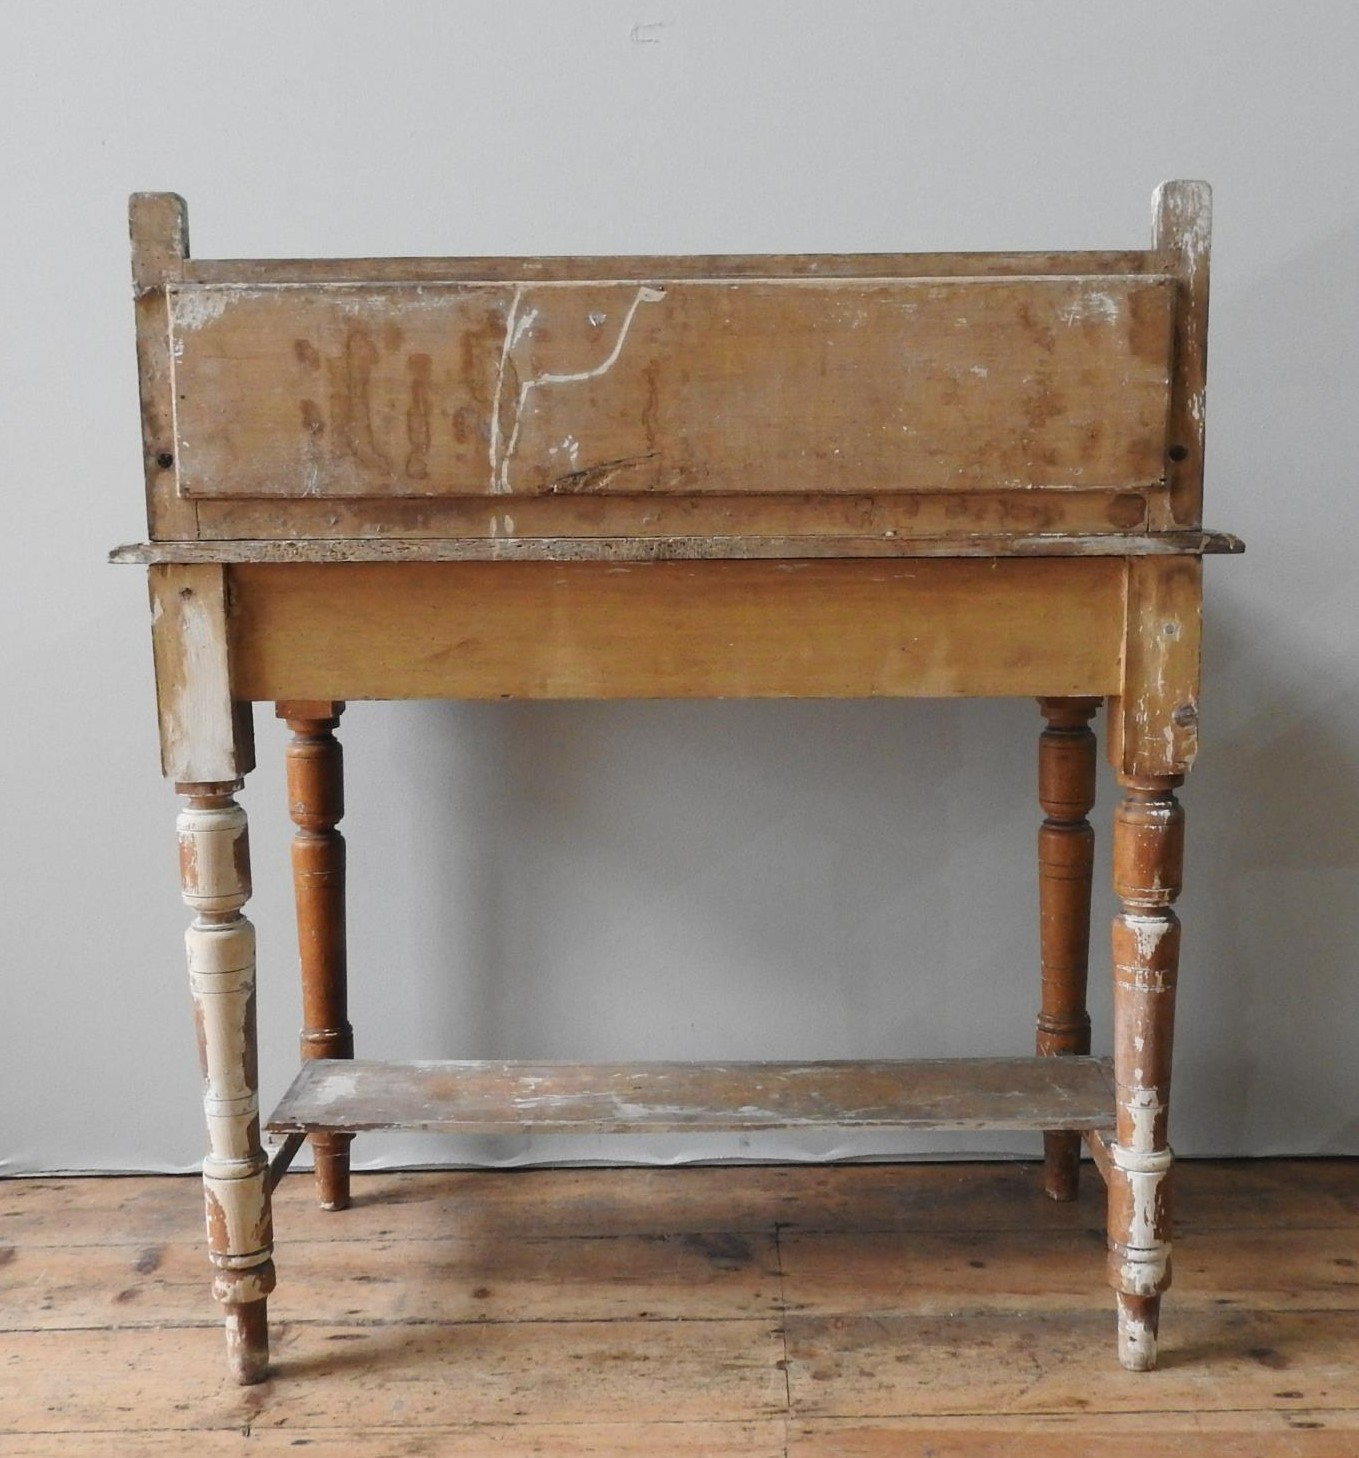 A 19th CENTURY PINE GRAIN PAINTED TILE BACK WASH STAND, 100 x 91 x 46 cm - Image 3 of 6